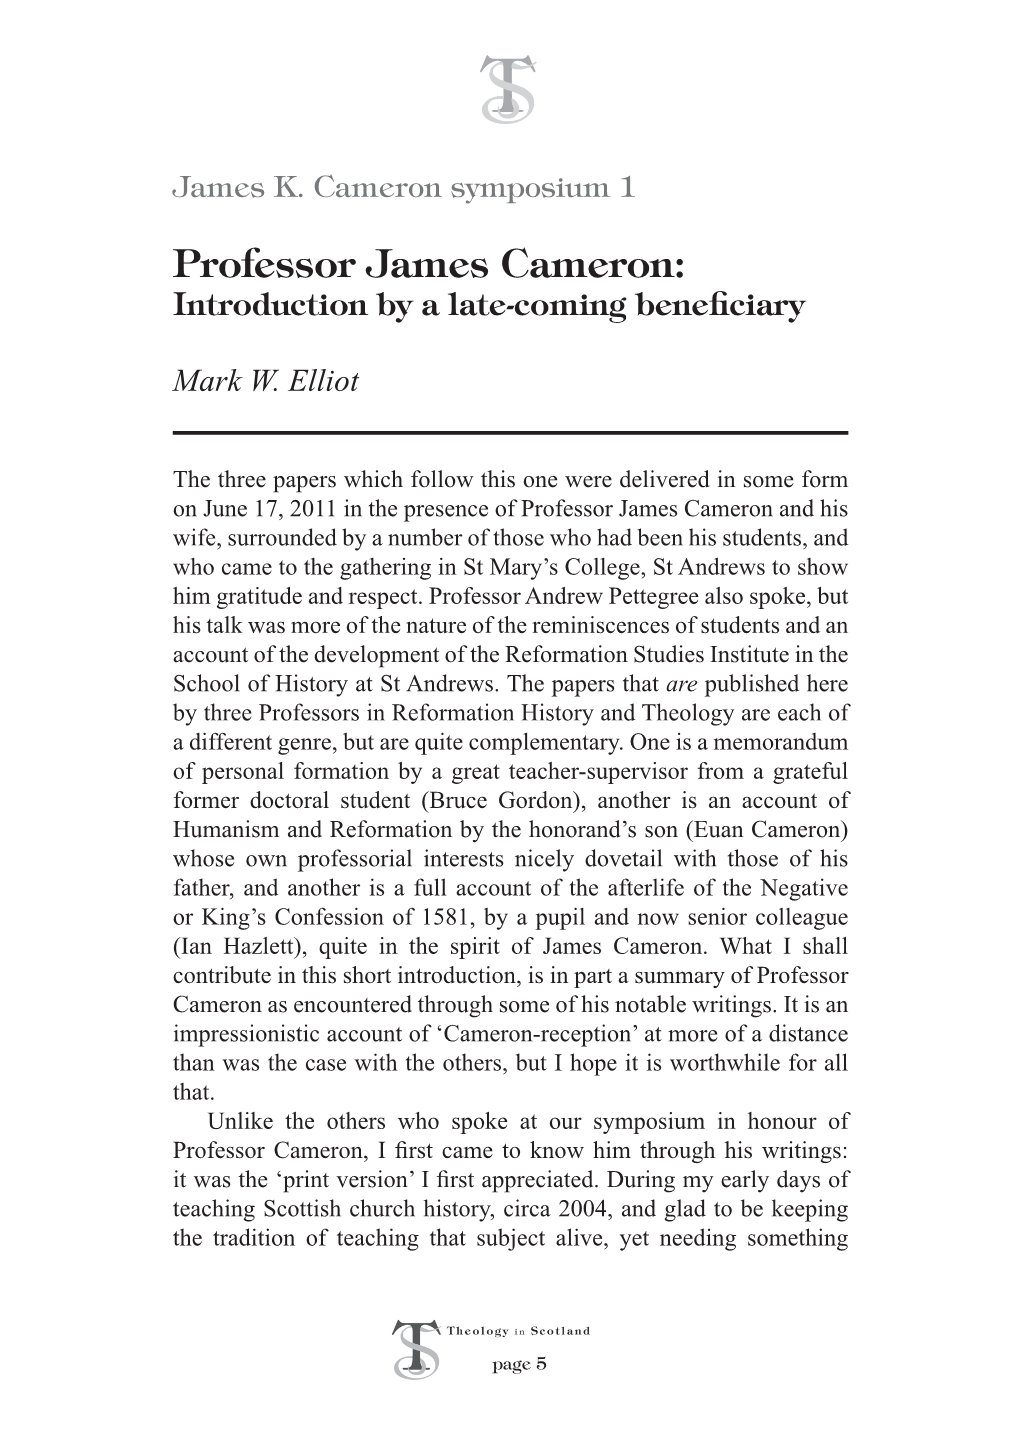 Professor James Cameron: Introduction by a Late-Coming Beneficiary